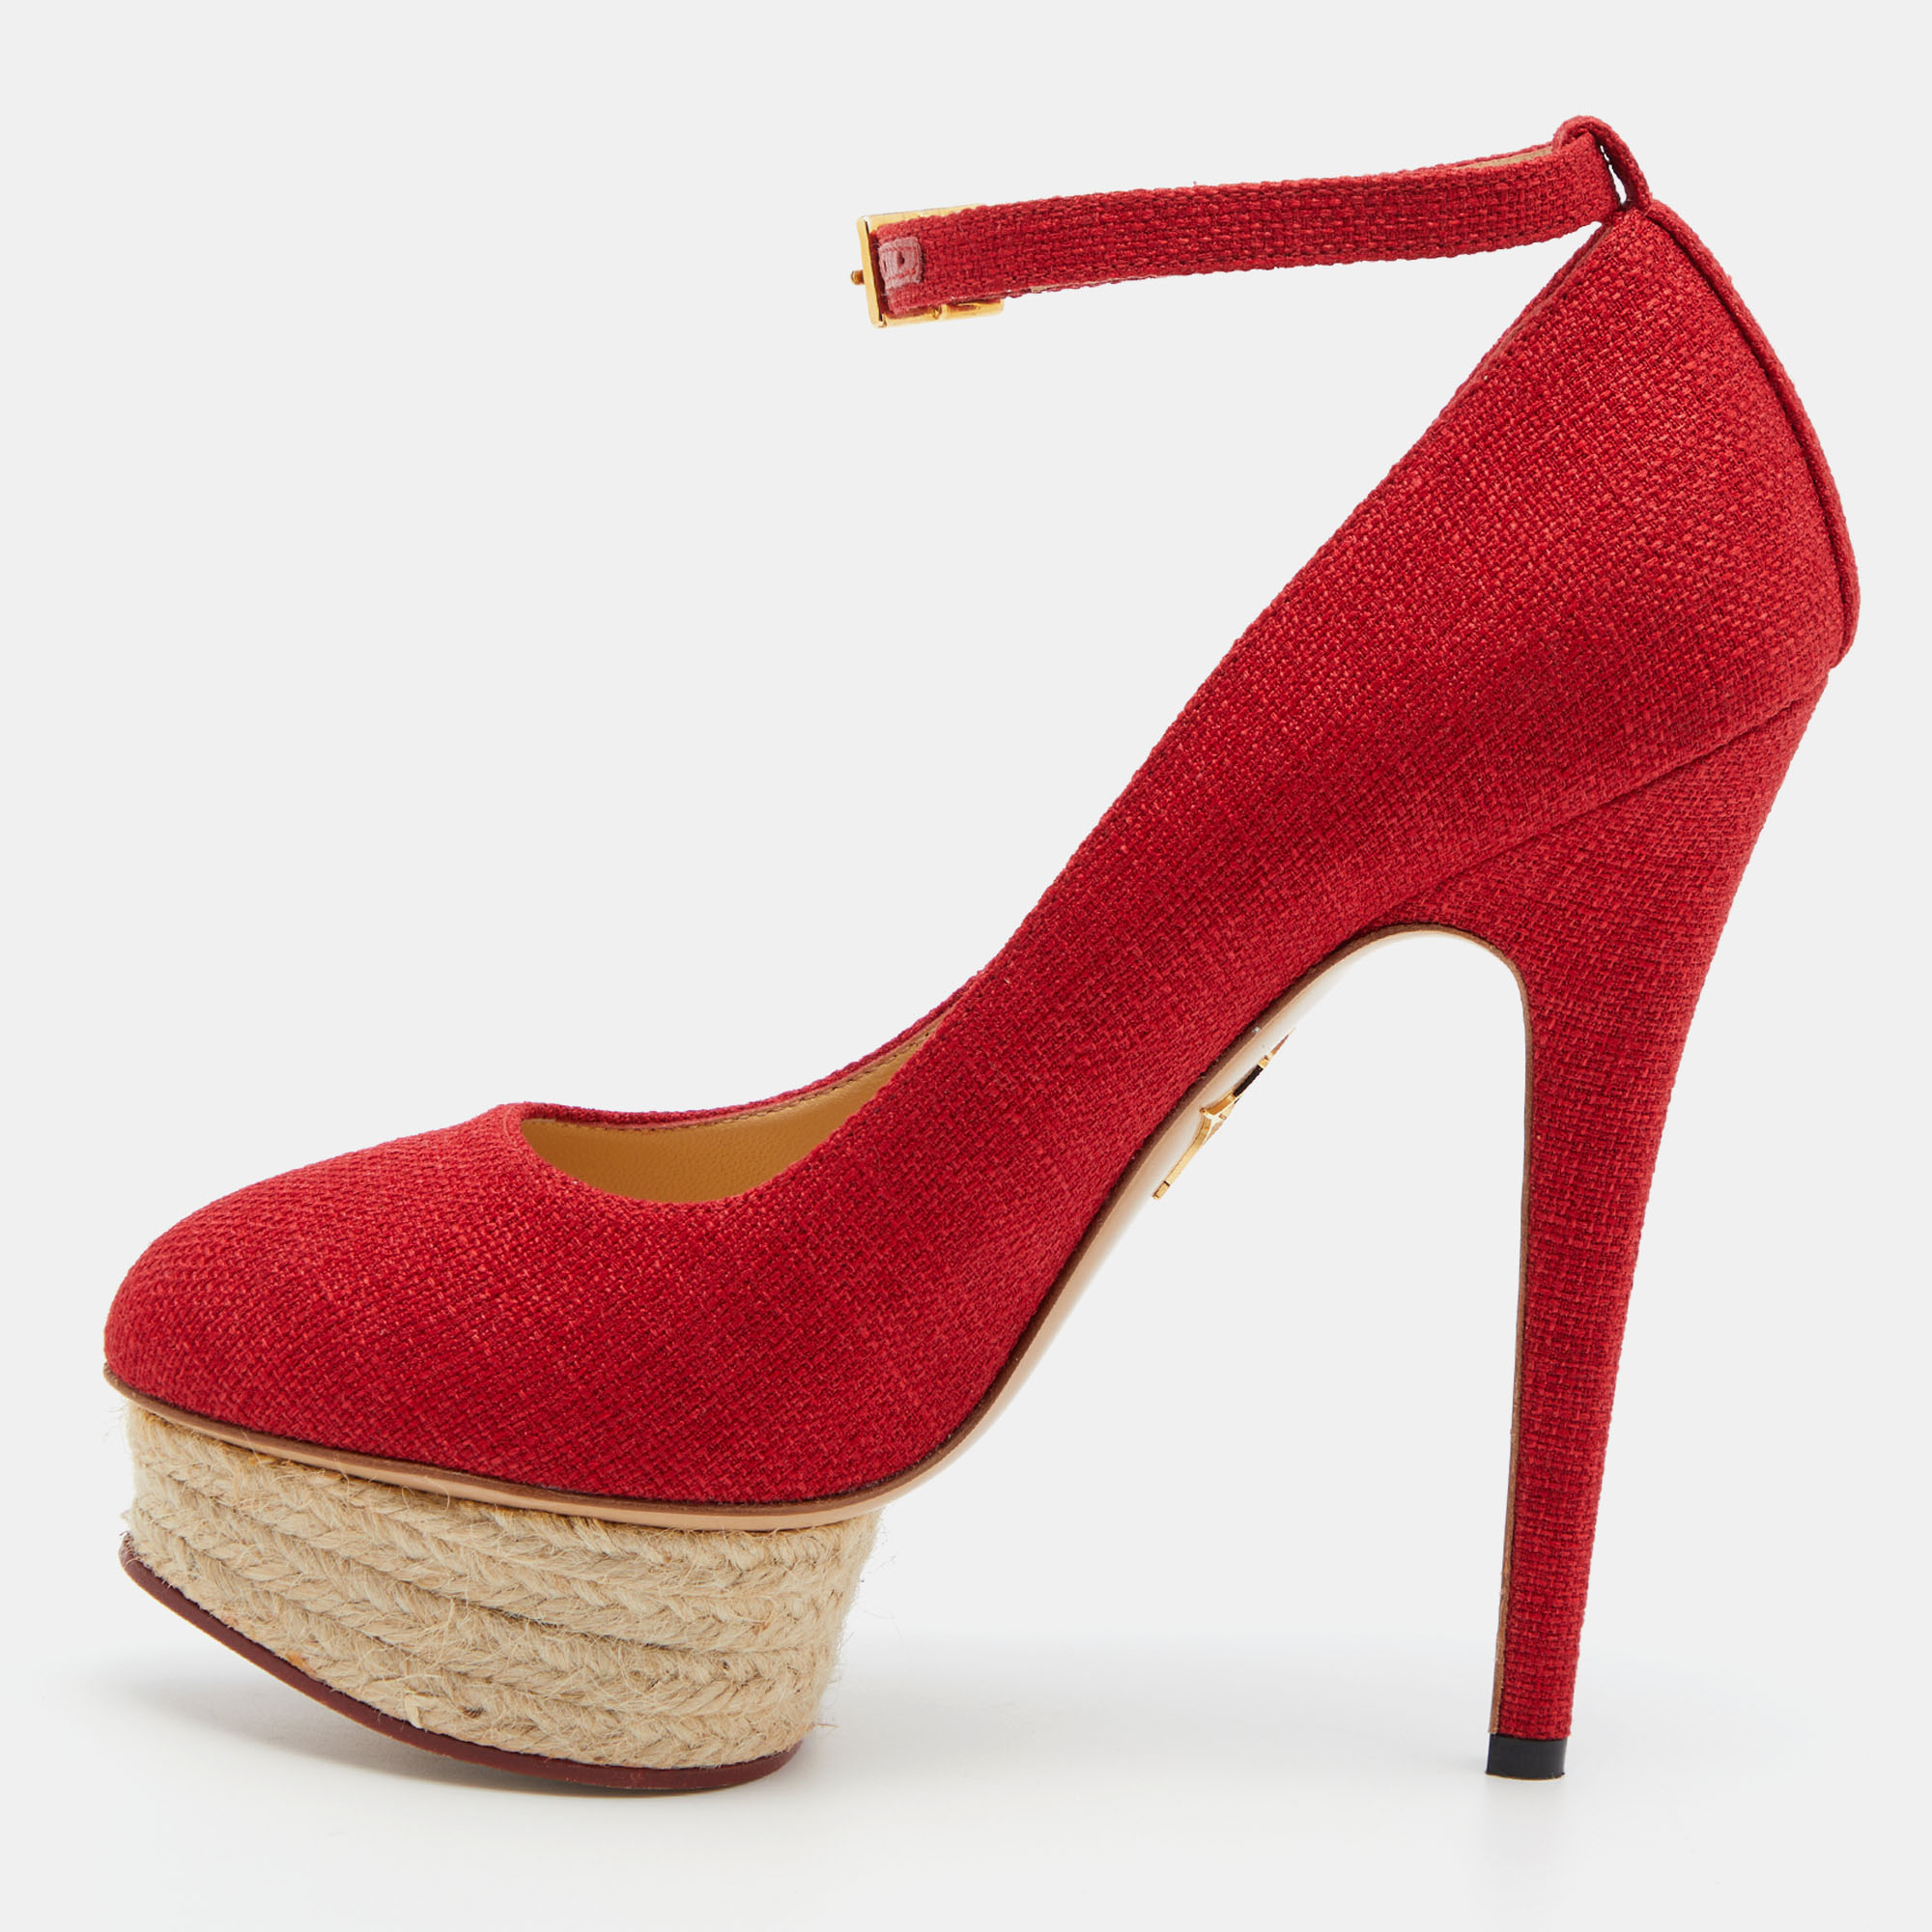 Pre-owned Charlotte Olympia Red Canvas Dolores Ankle Strap Platform Pumps Size 37.5